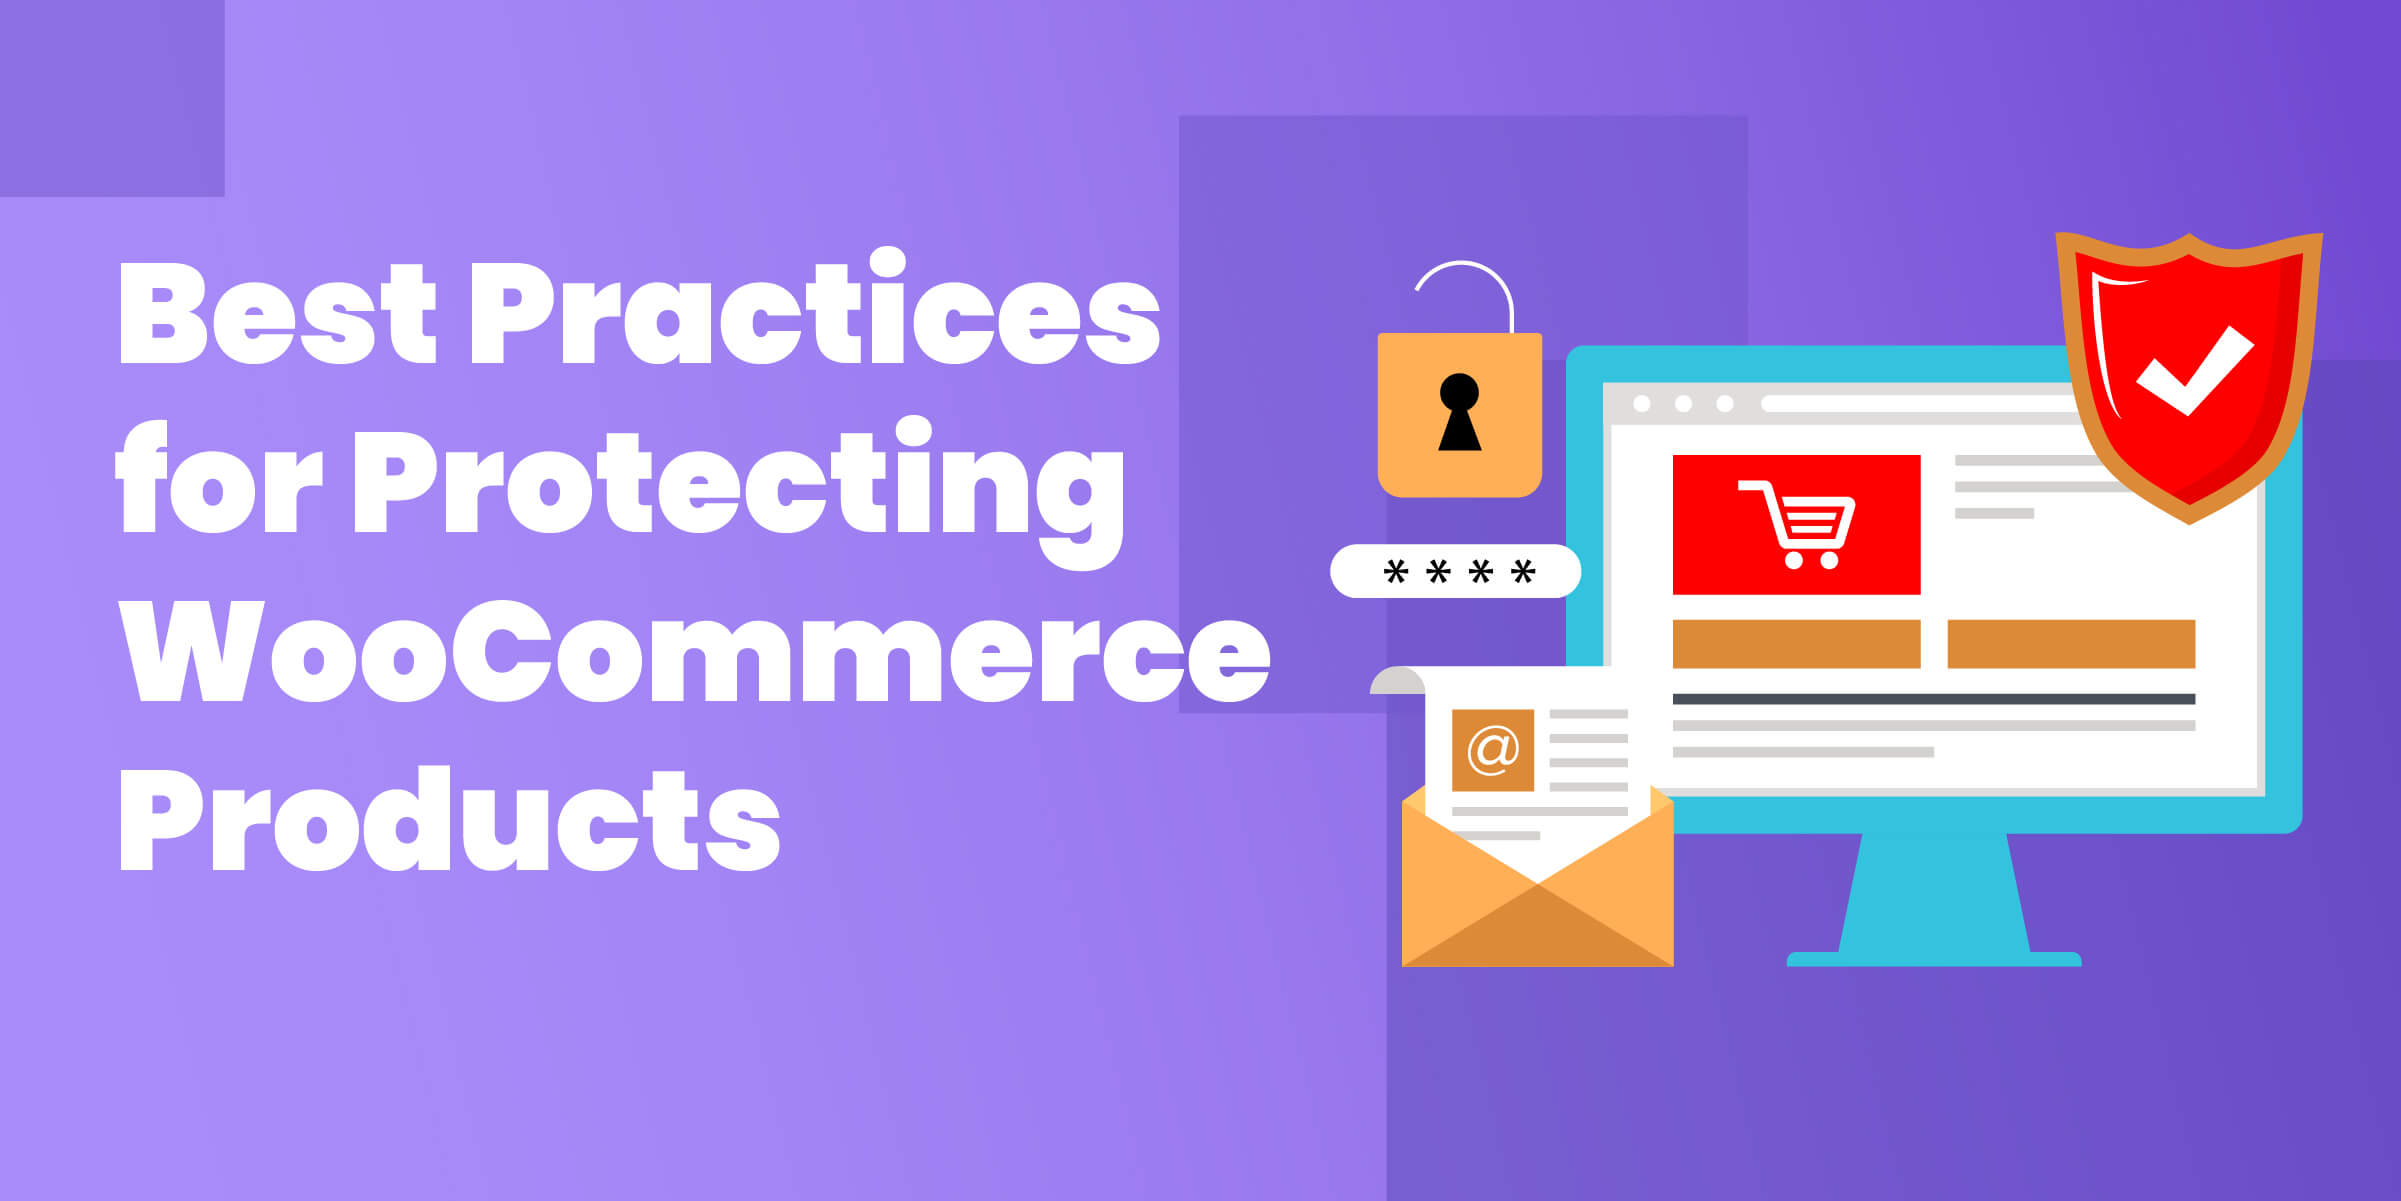 Best Practices for Protecting WooCommerce Products